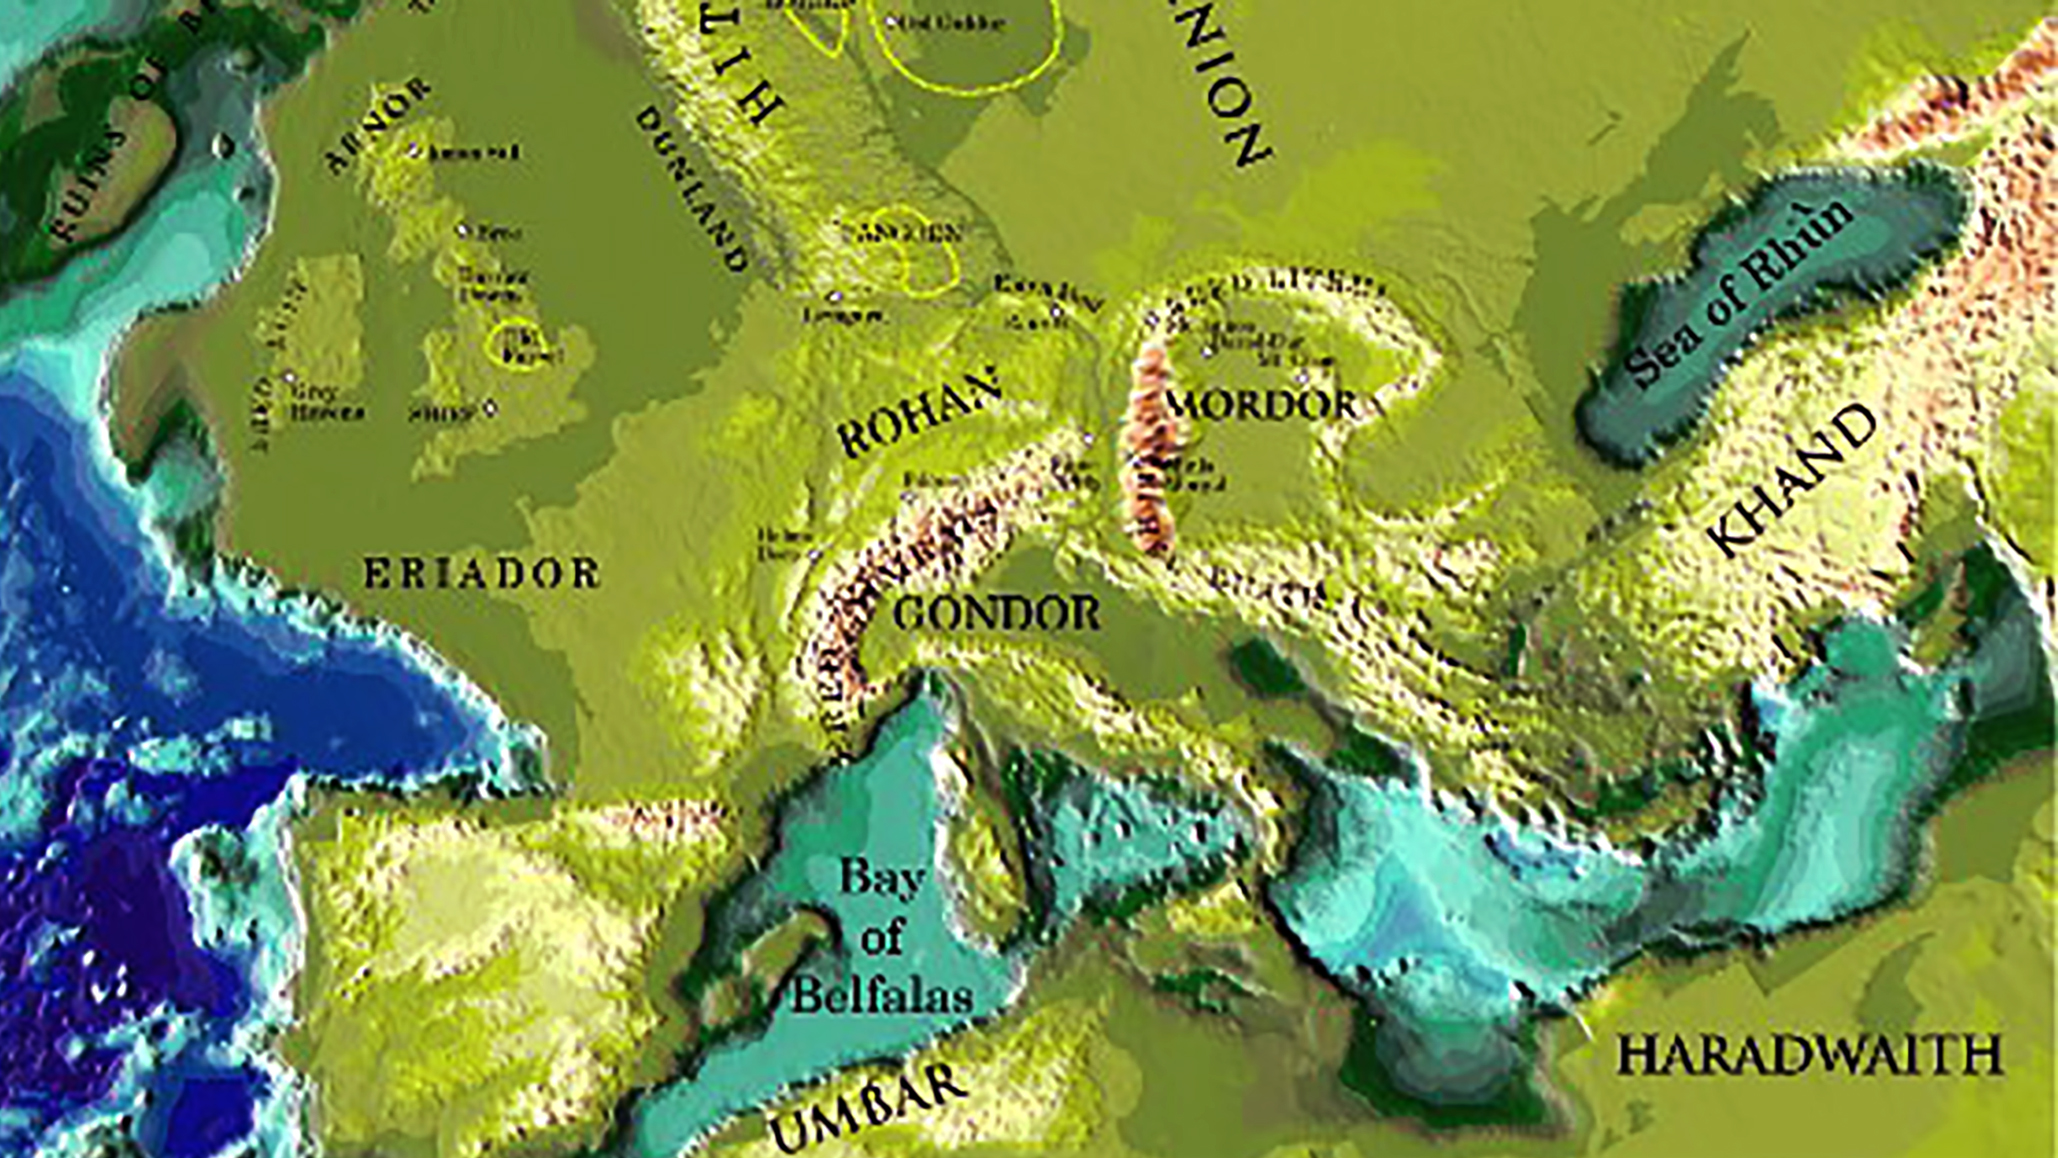 I created a Middle Earth map using terrain from real world Europe